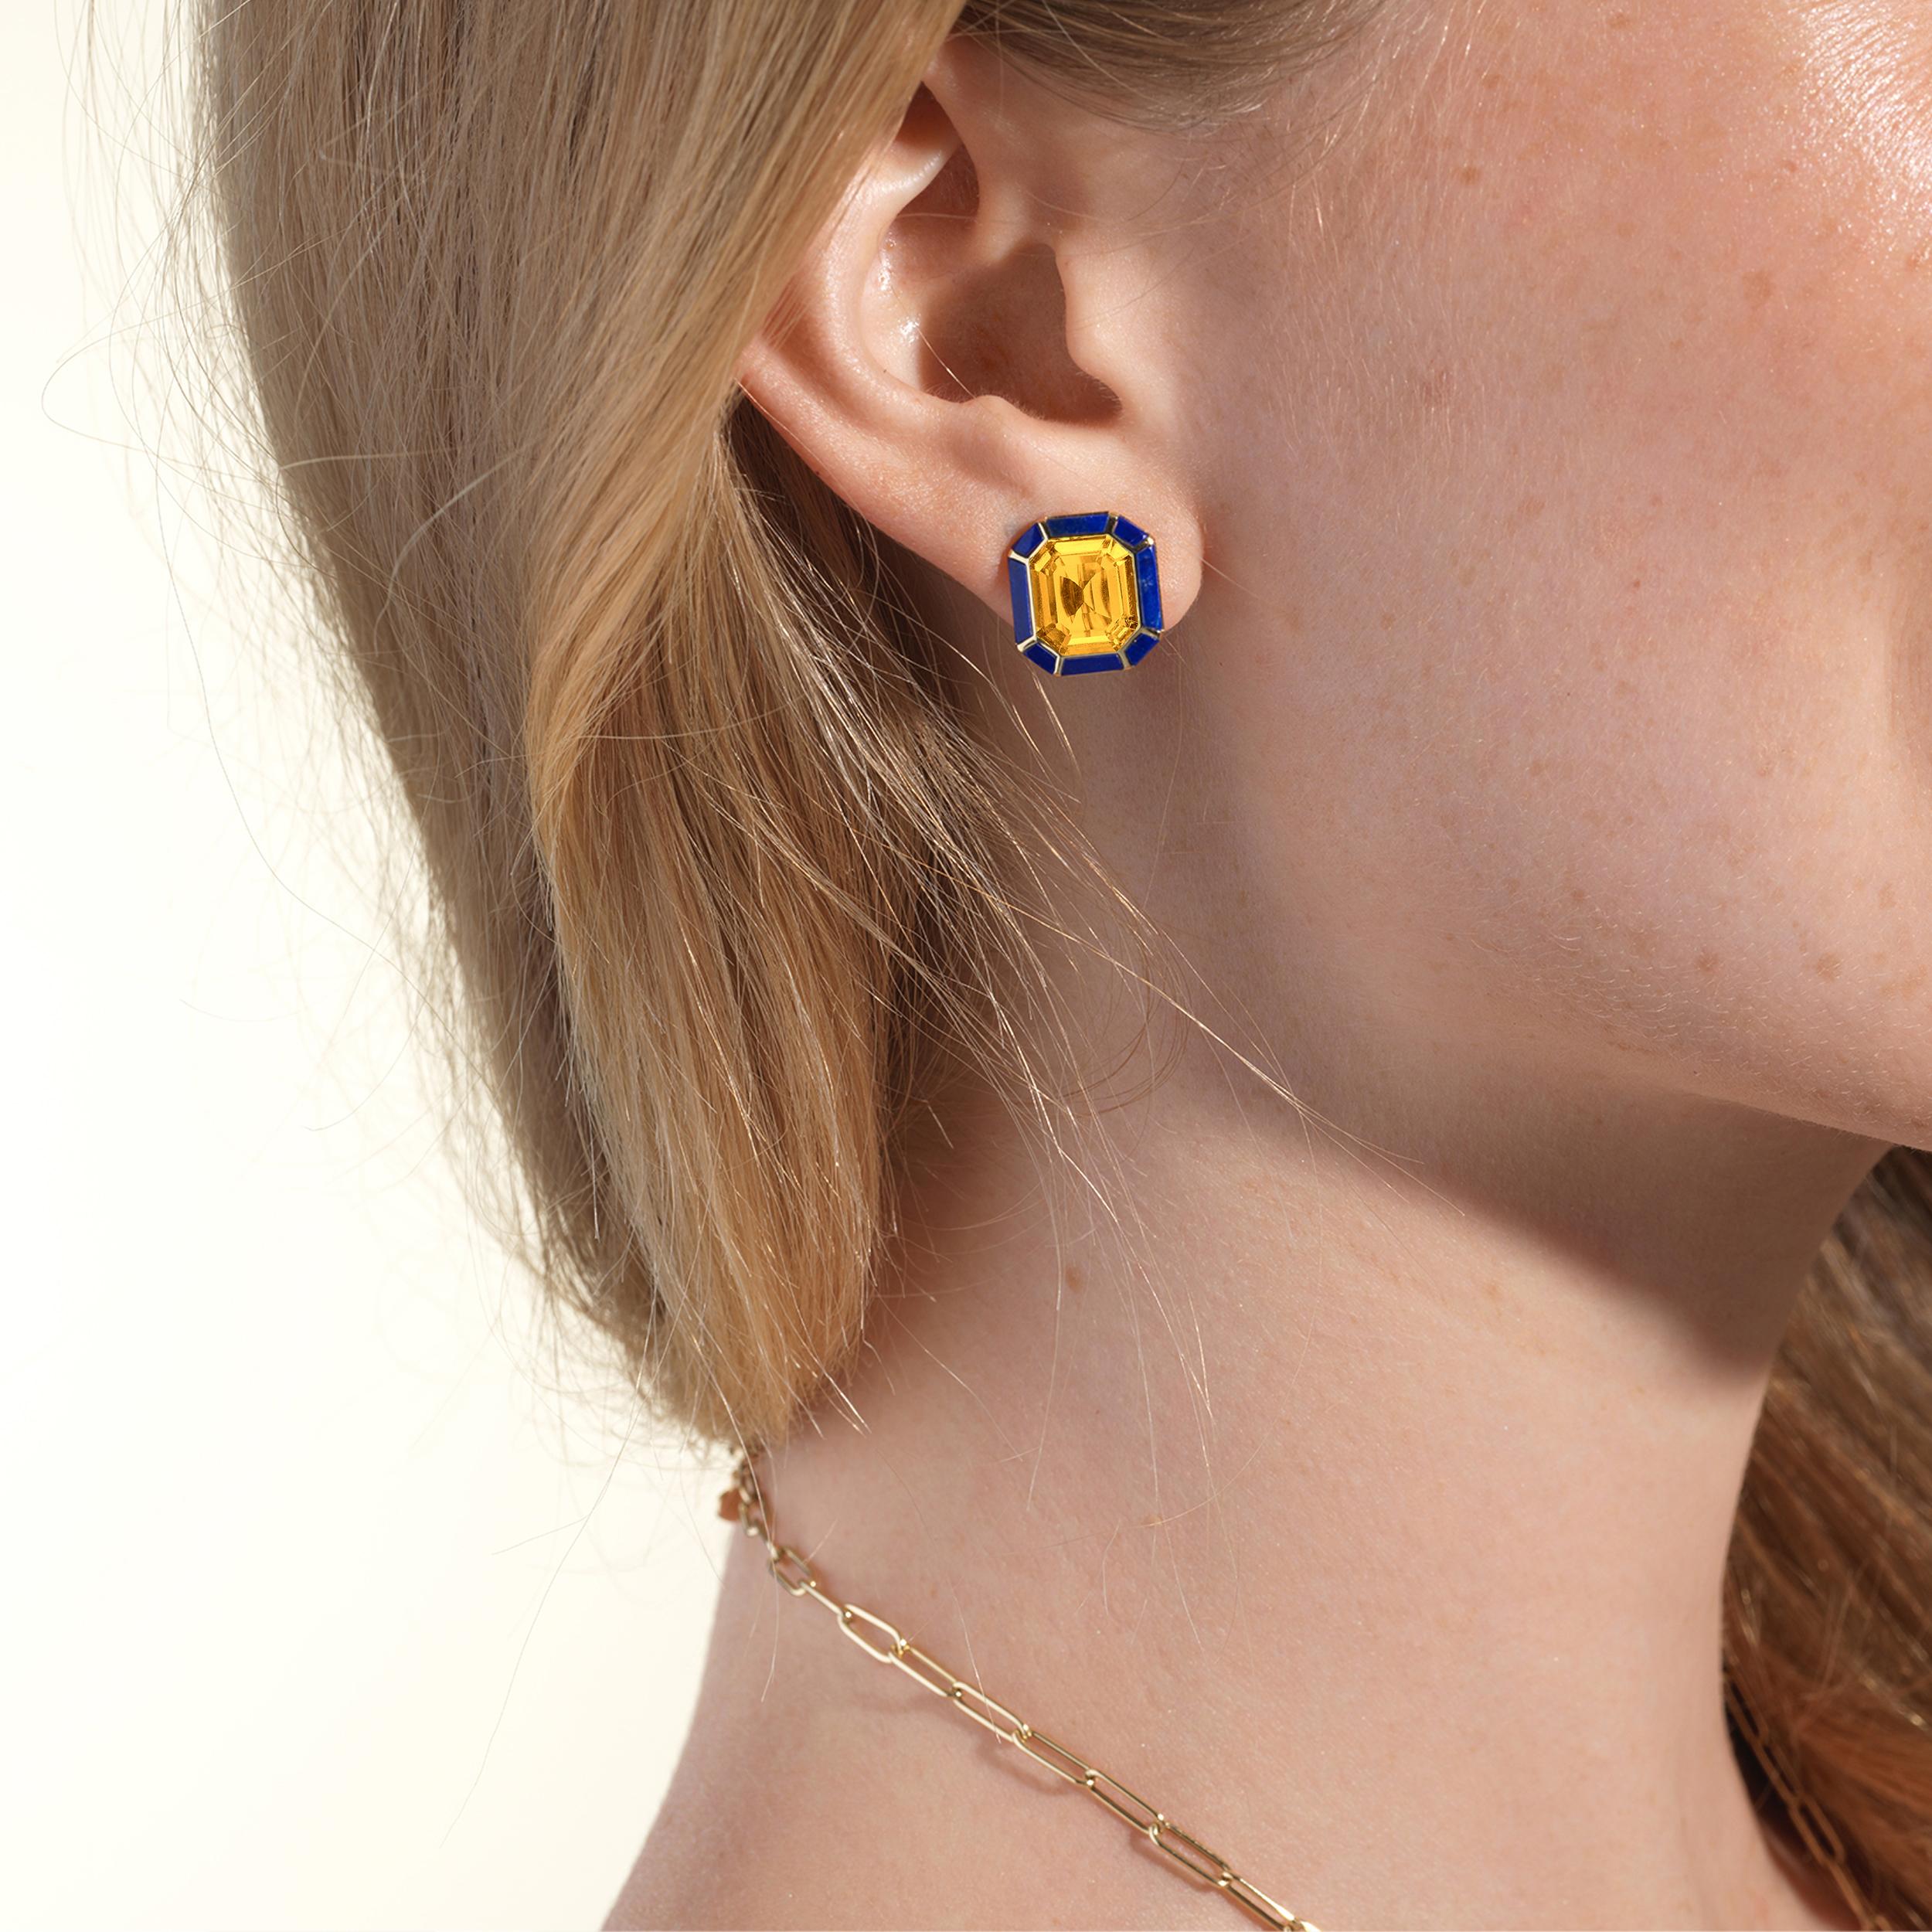 The Citrine & Lapis Lazuli Stud Earrings from the 'Melange' Collection showcase a captivating blend of elegance and charm. Crafted with exquisite attention to detail, these earrings feature stunning emerald cut Citrine and Lapis Lazuli gemstones set